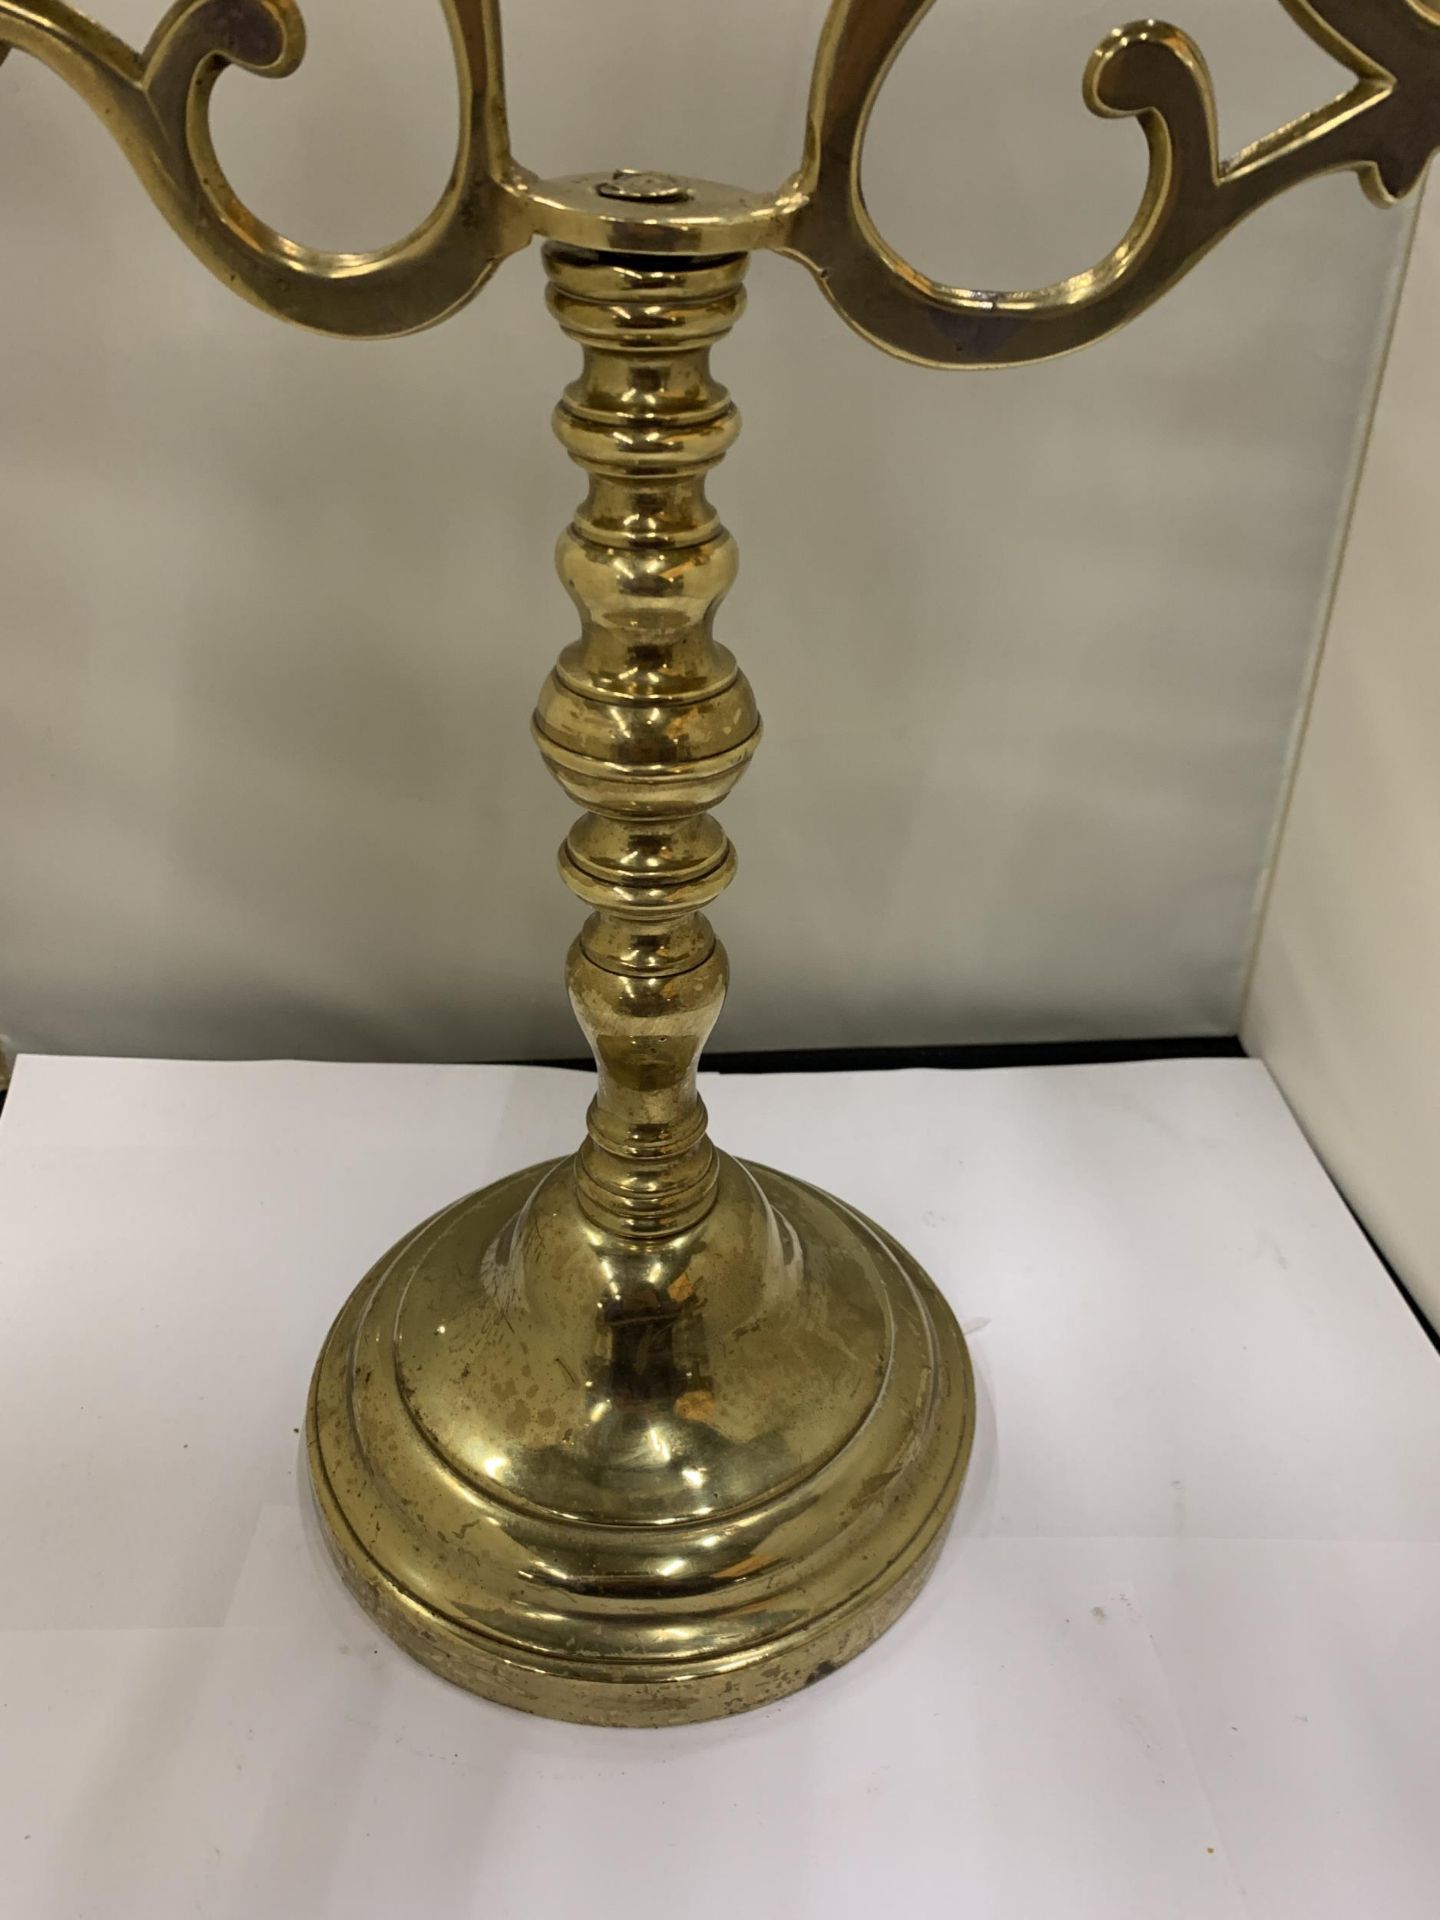 A HEAVY BRASS CANDELABRA WITH A FIGURE HOLDING A STAFF - Image 3 of 5